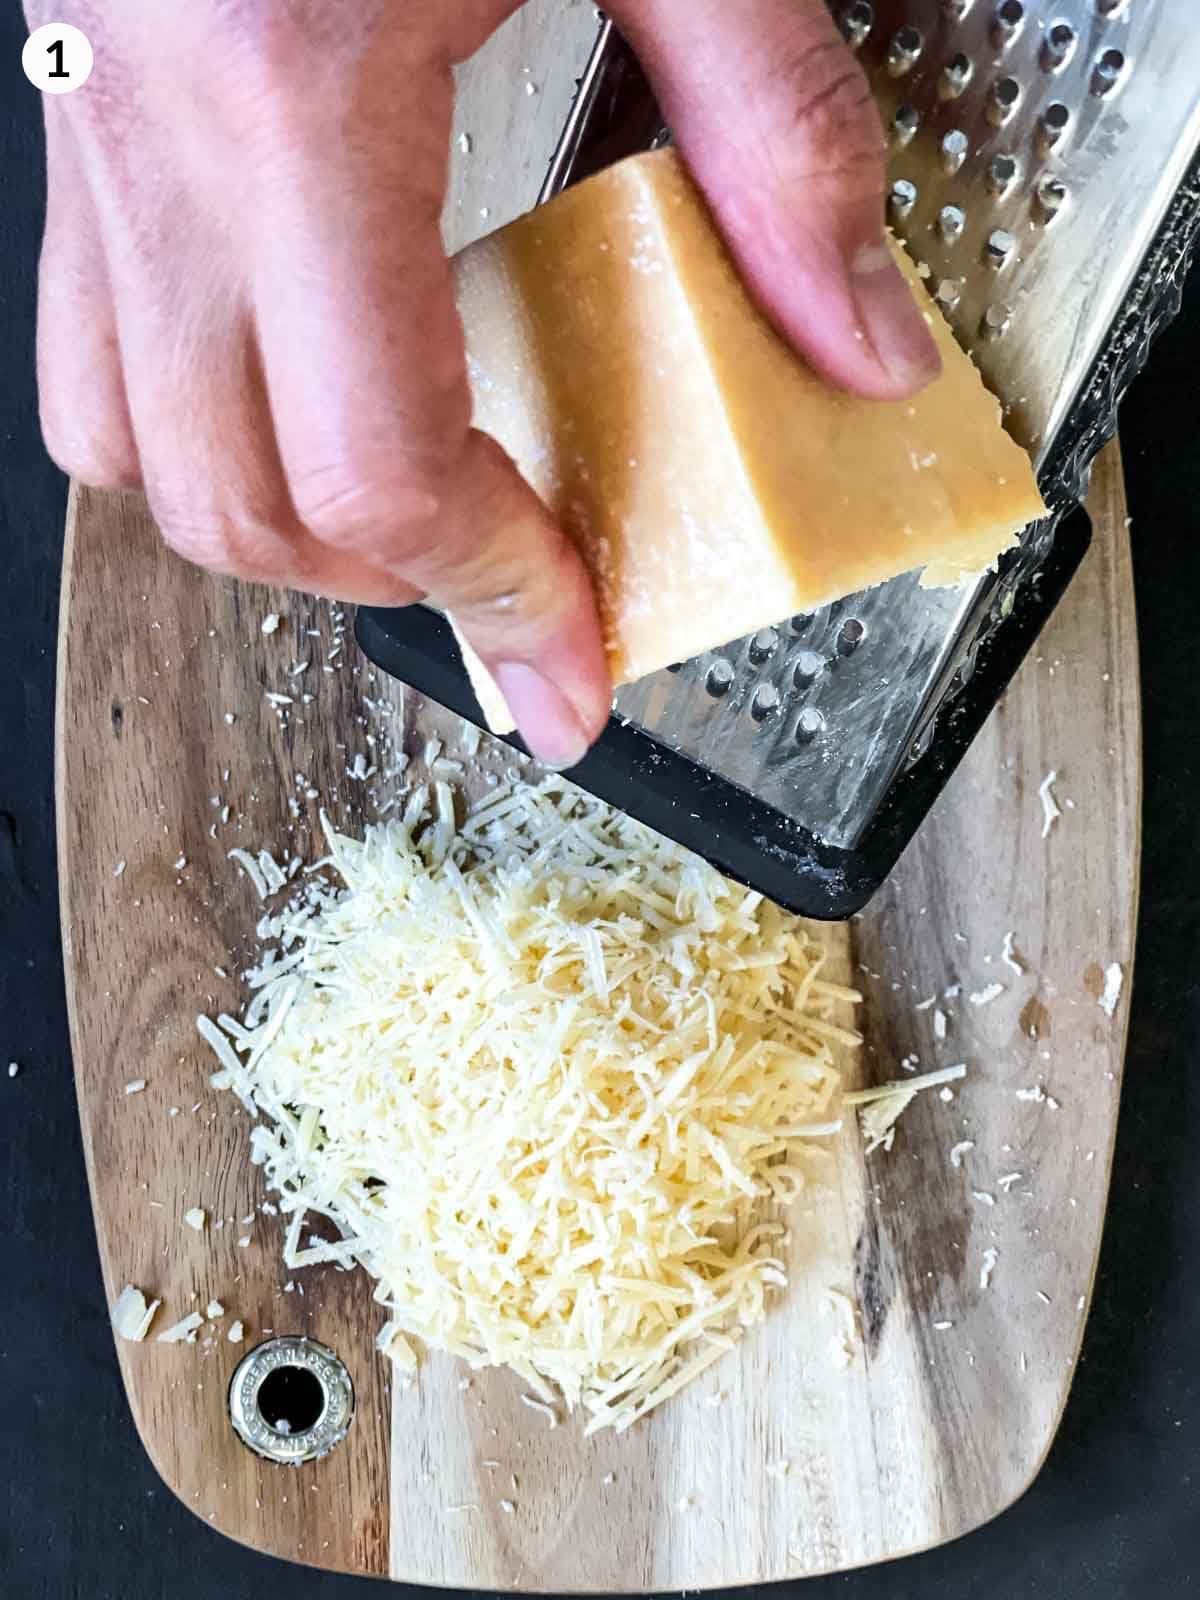 Hand grating parmesan cheese block with a grater on a wooden block